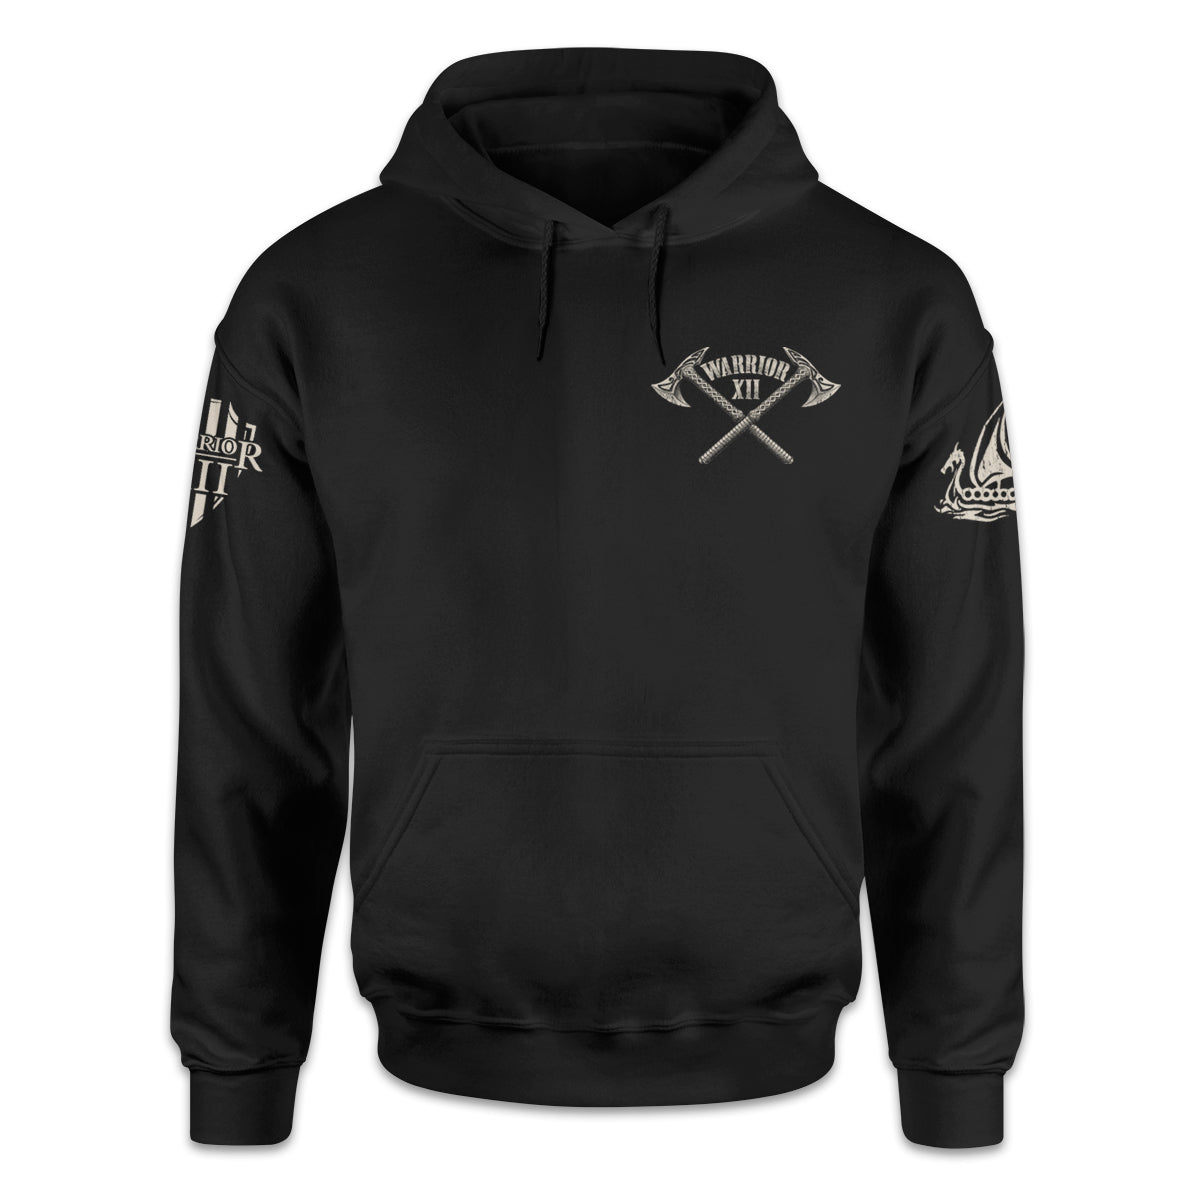 A black hoodie with two axes crossed over and the words "Warrior XII" printed on the front.